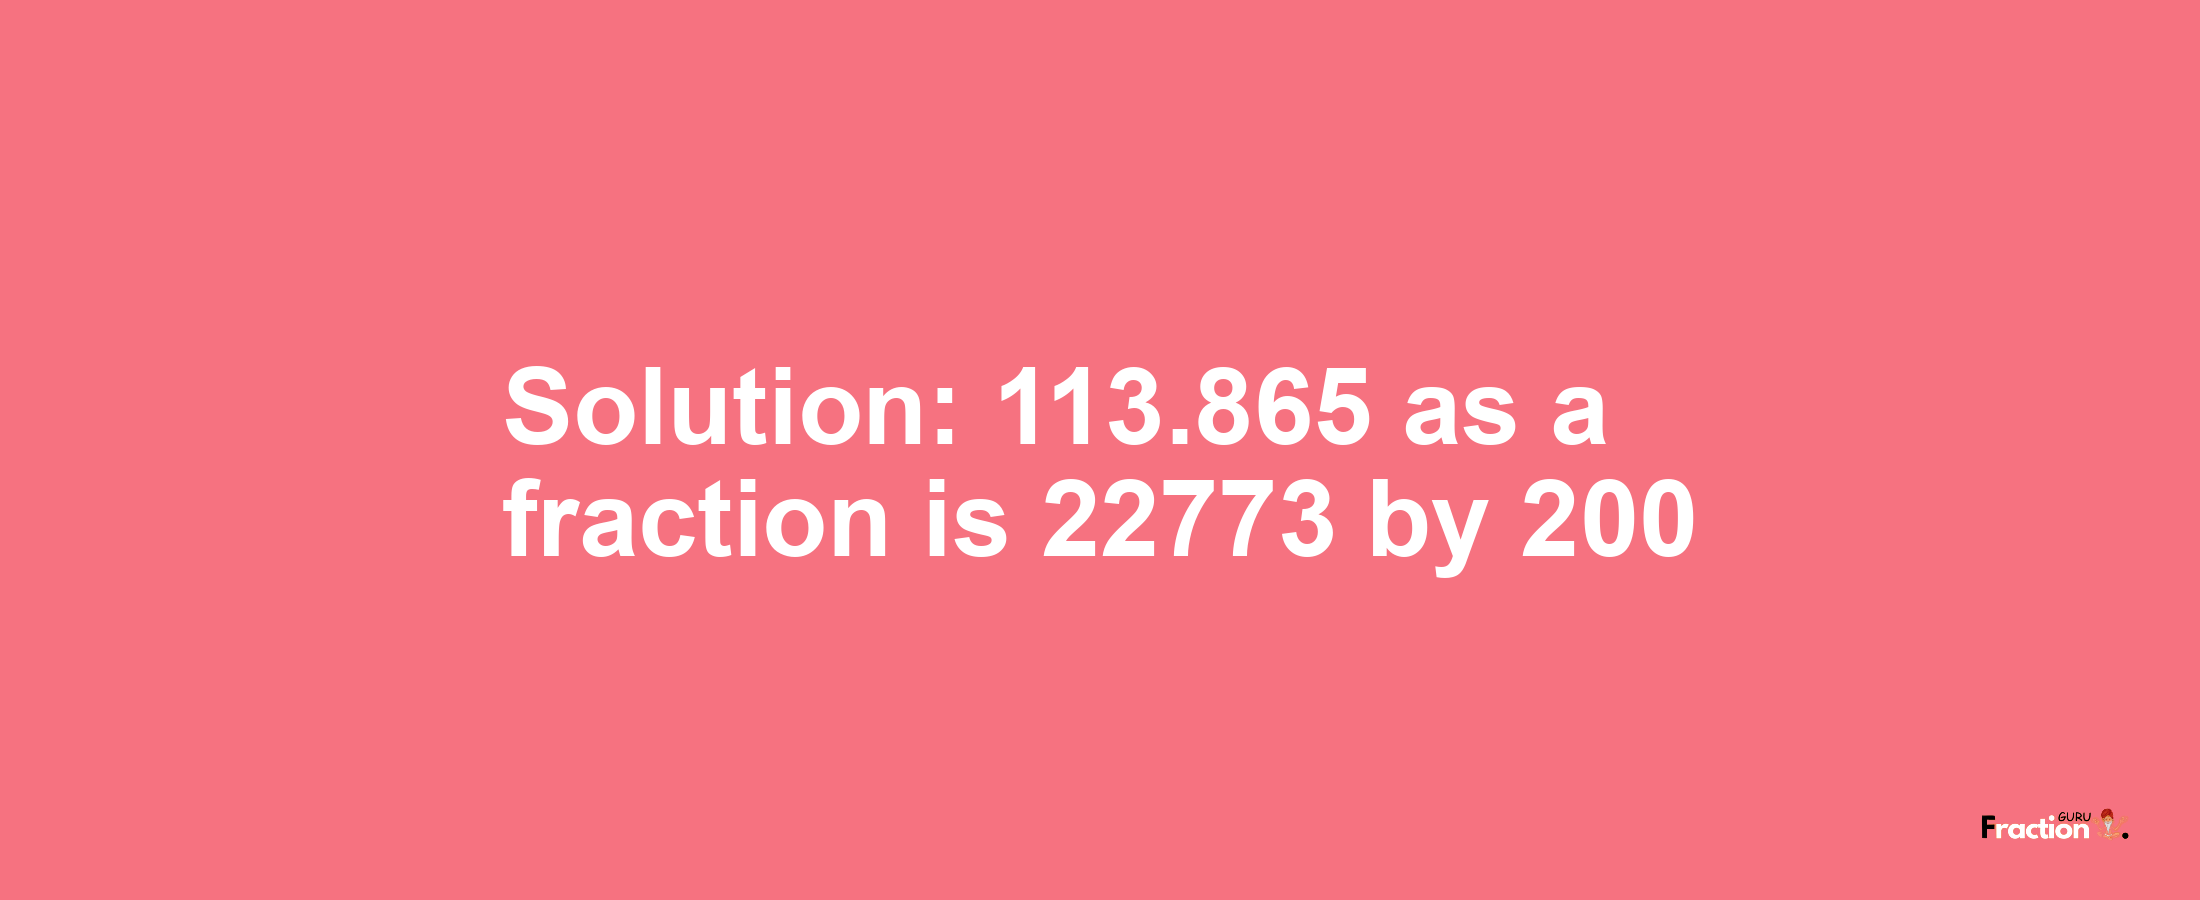 Solution:113.865 as a fraction is 22773/200